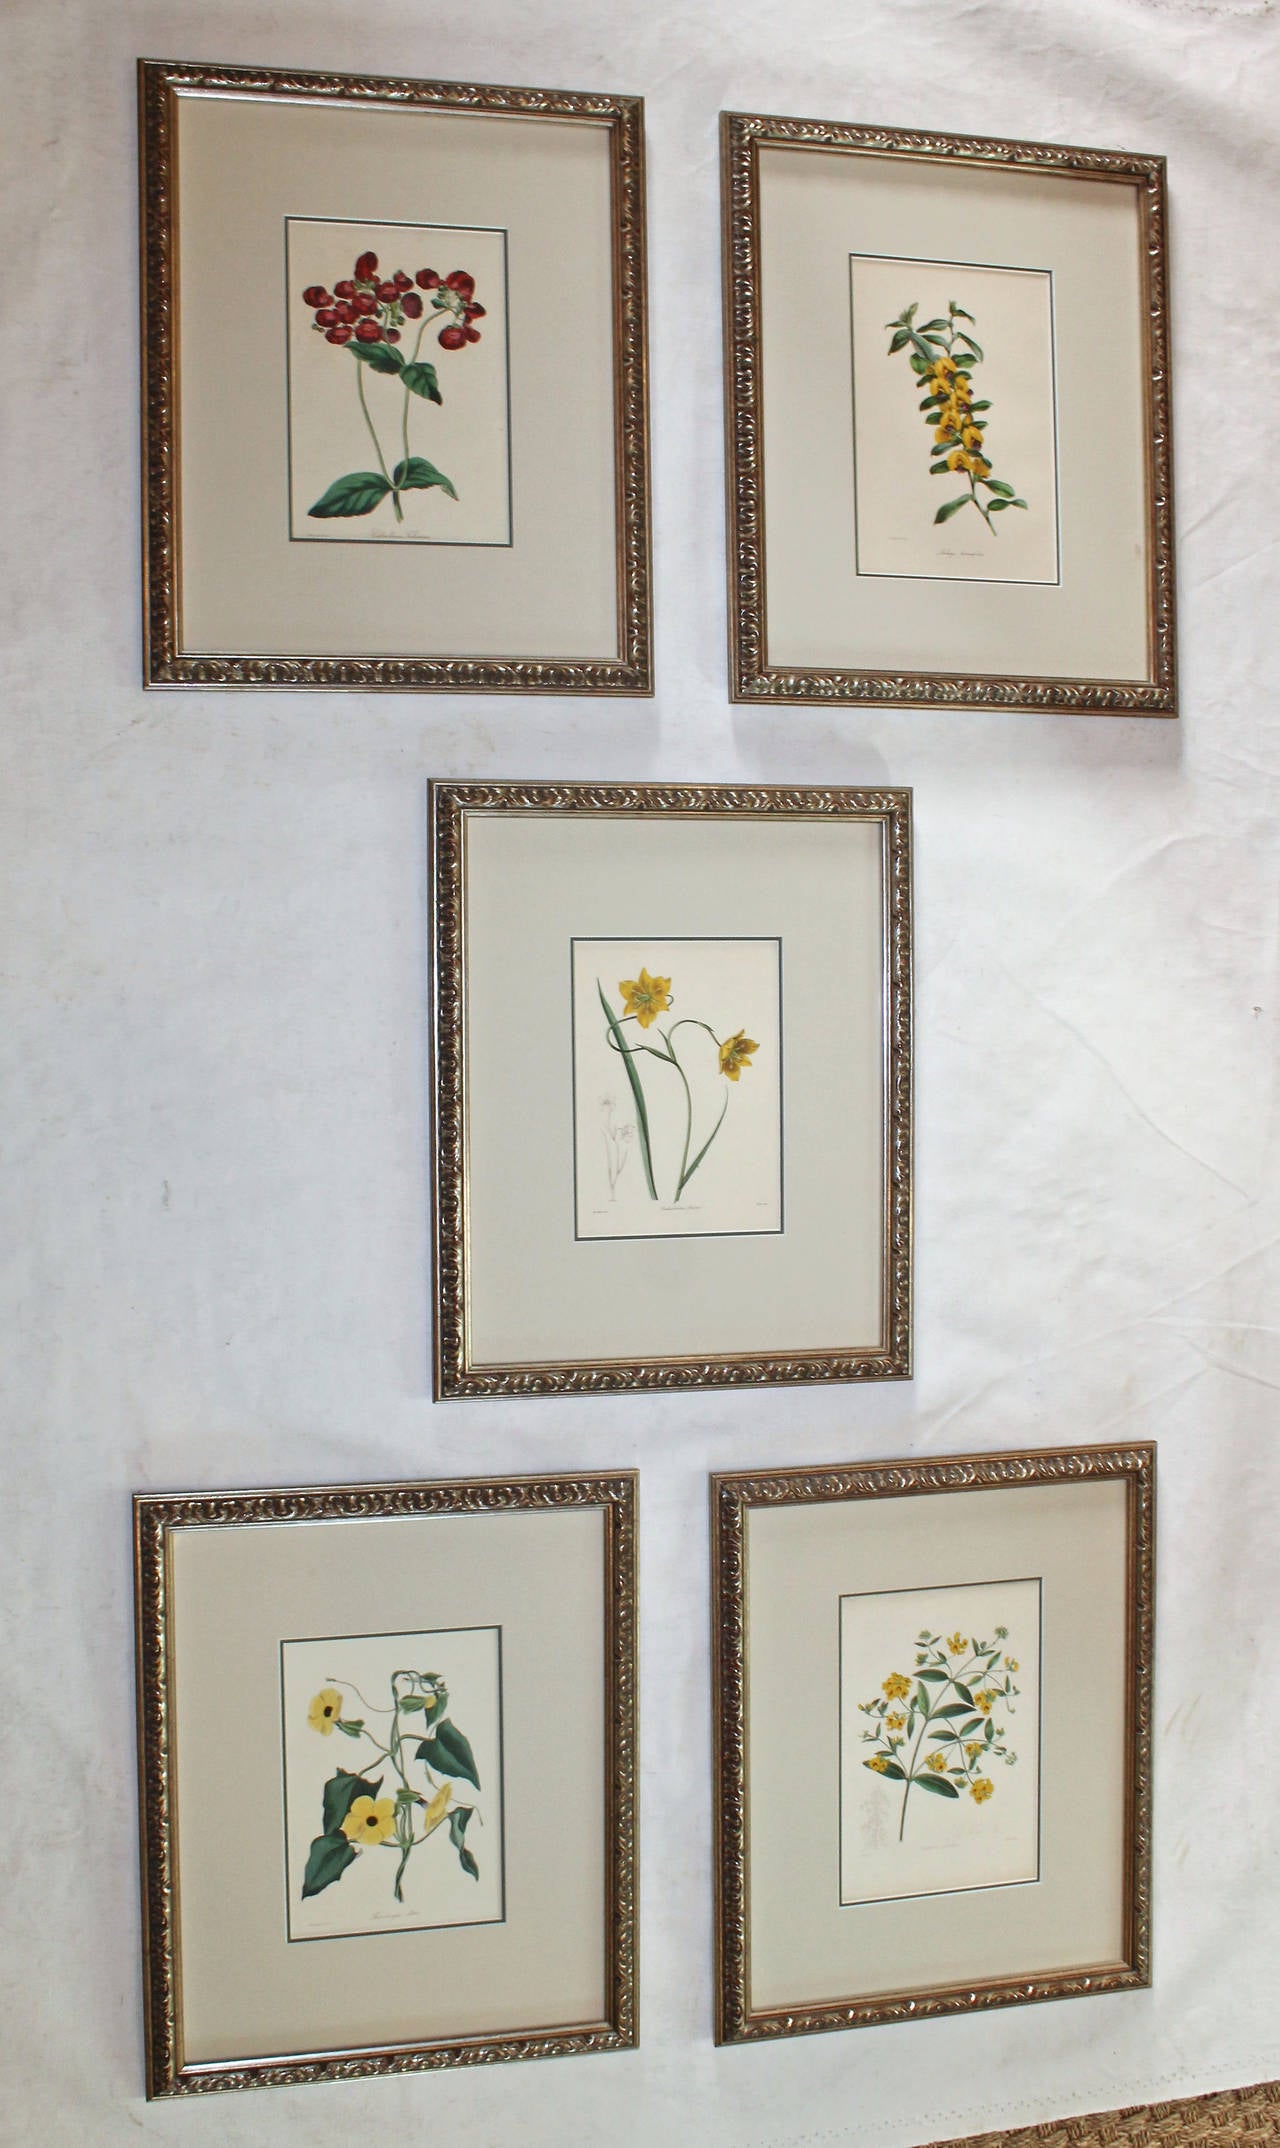 English Set of Five 19th Century Colored Flower Engravings